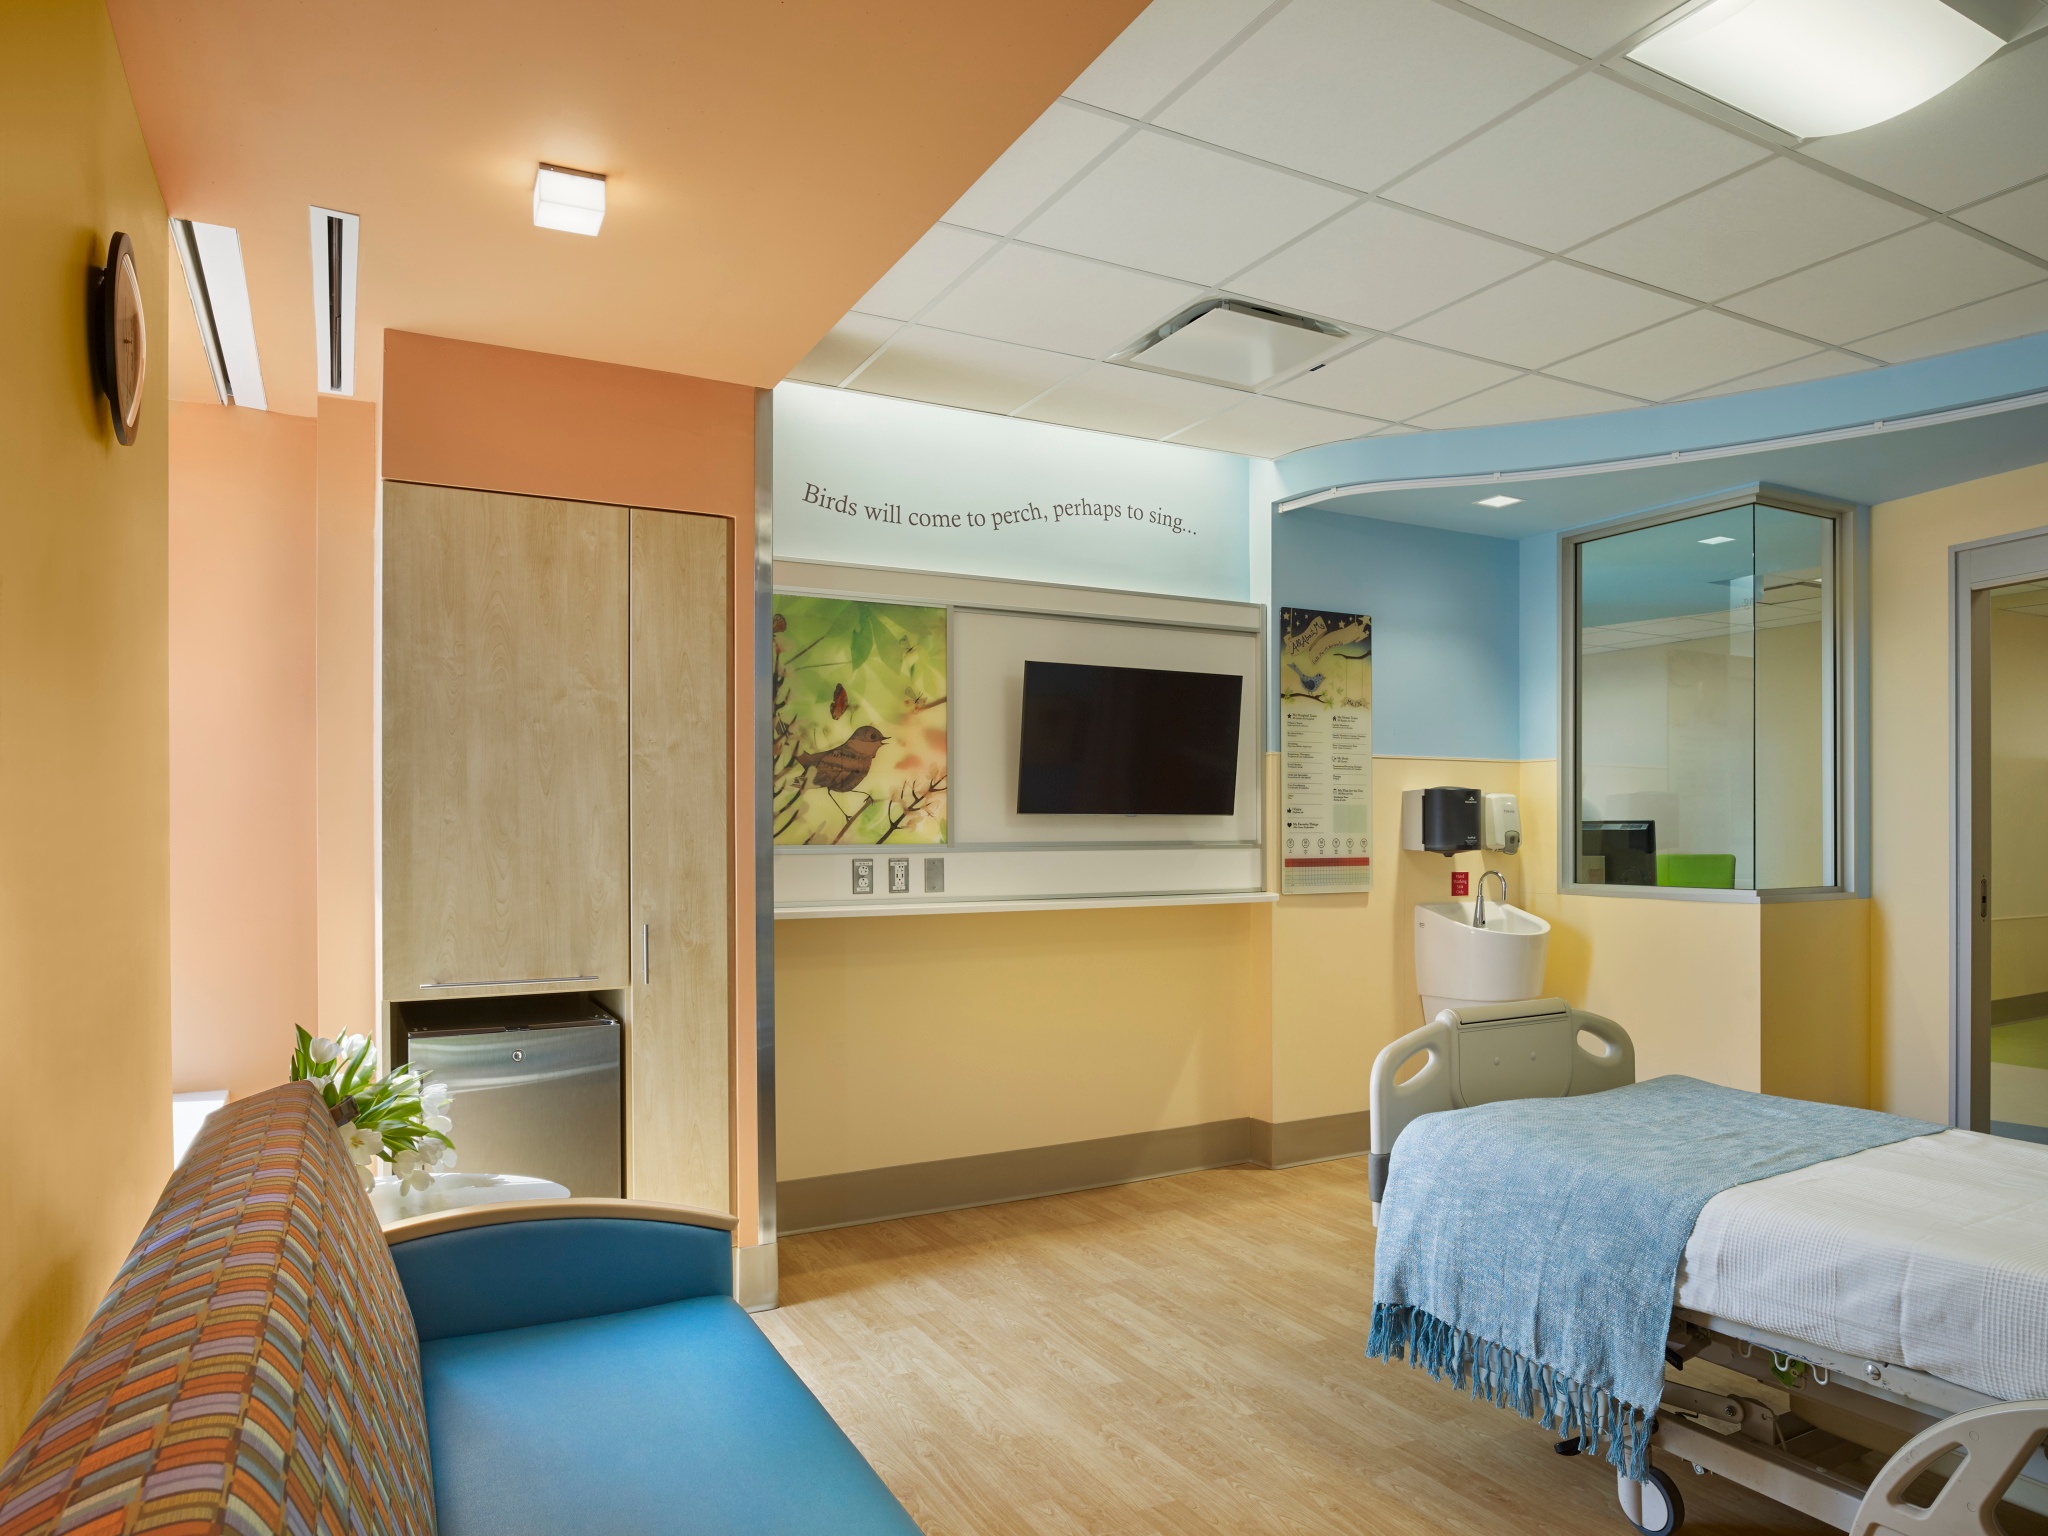 CHoNY PICU Patient Room with Environmental Graphics - Array Architects